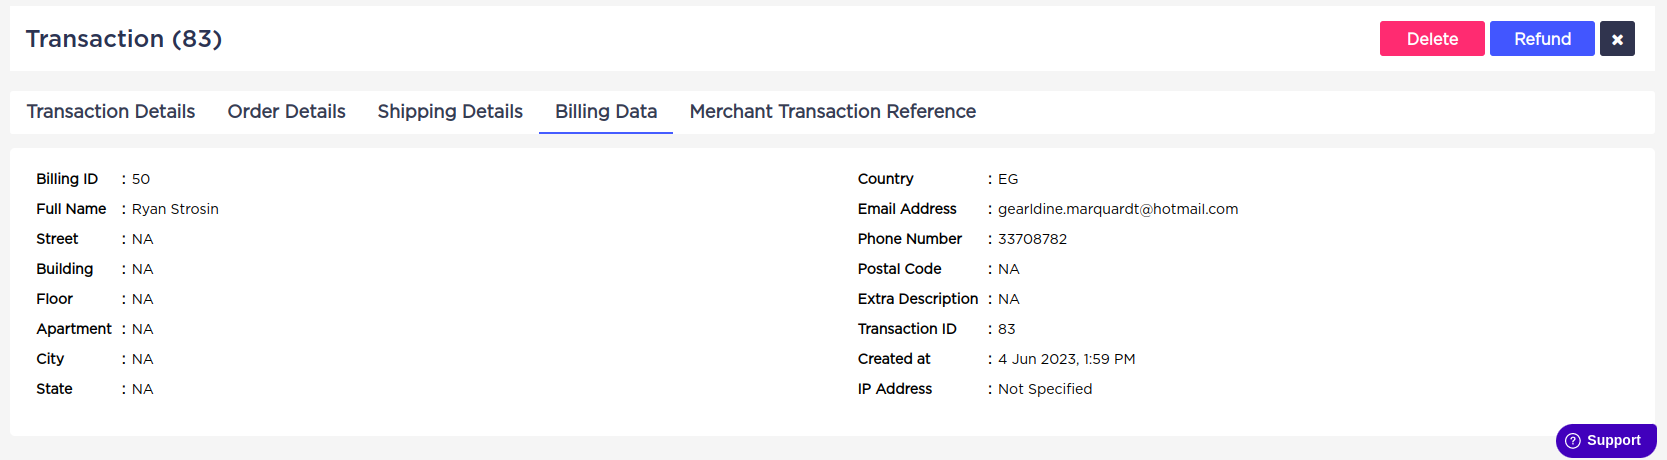 Accept Dashboard - Transactions Tab - The Related Billing Data.